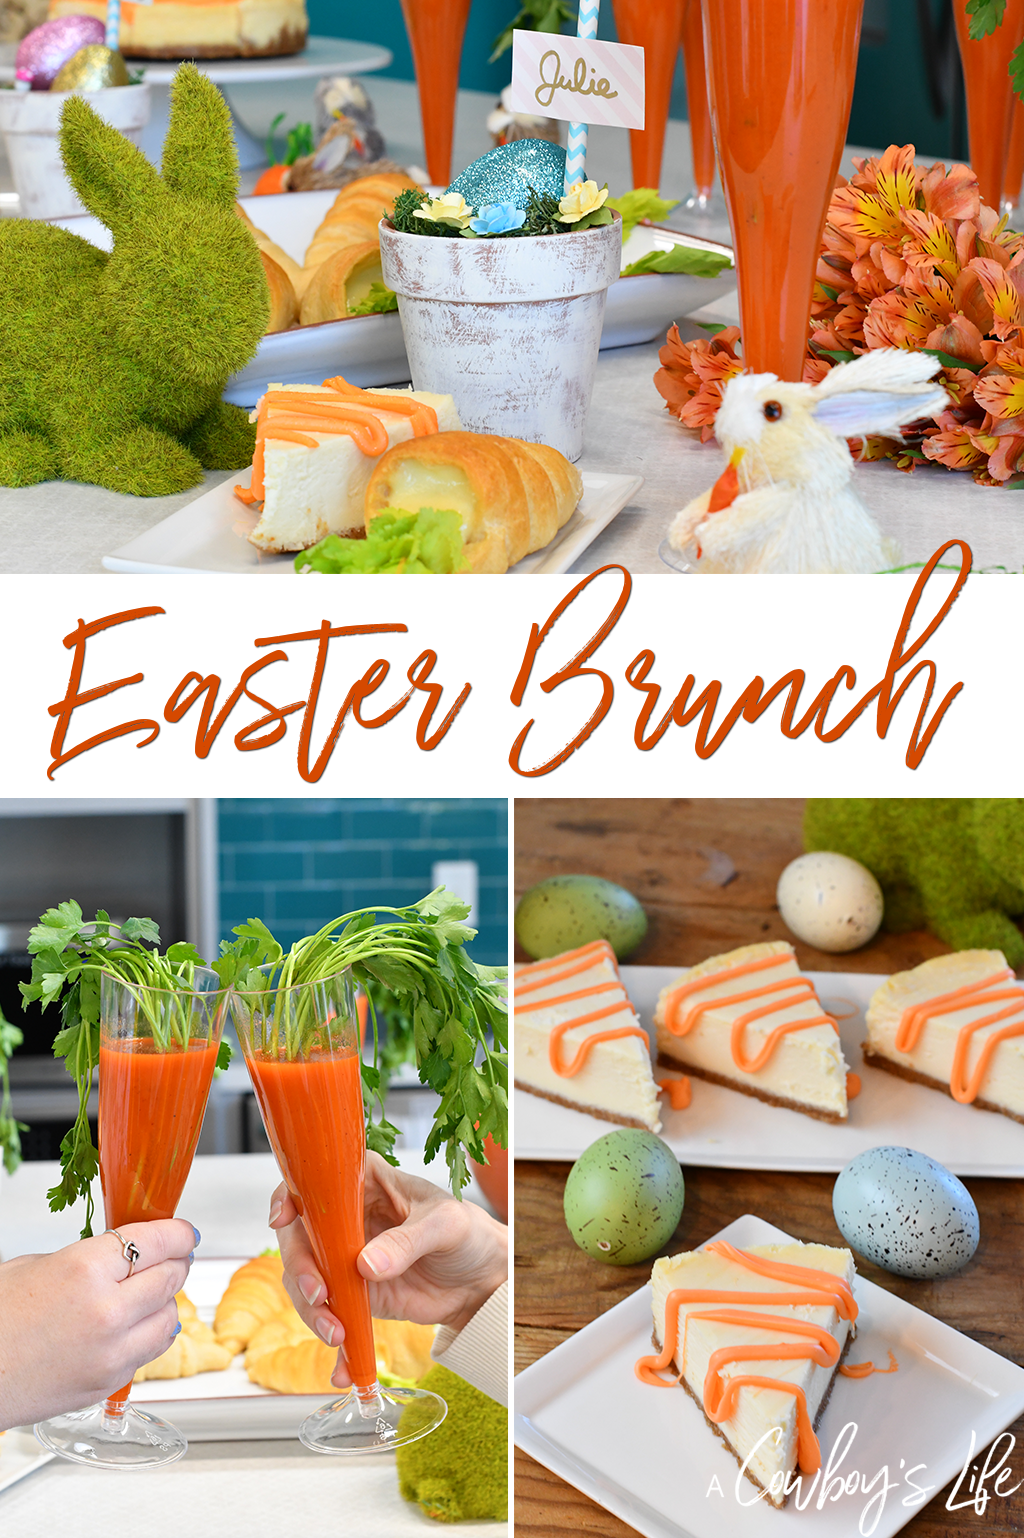 Tips on how to host an Easter brunch #easter #easterbrunch #brunch #partyideas